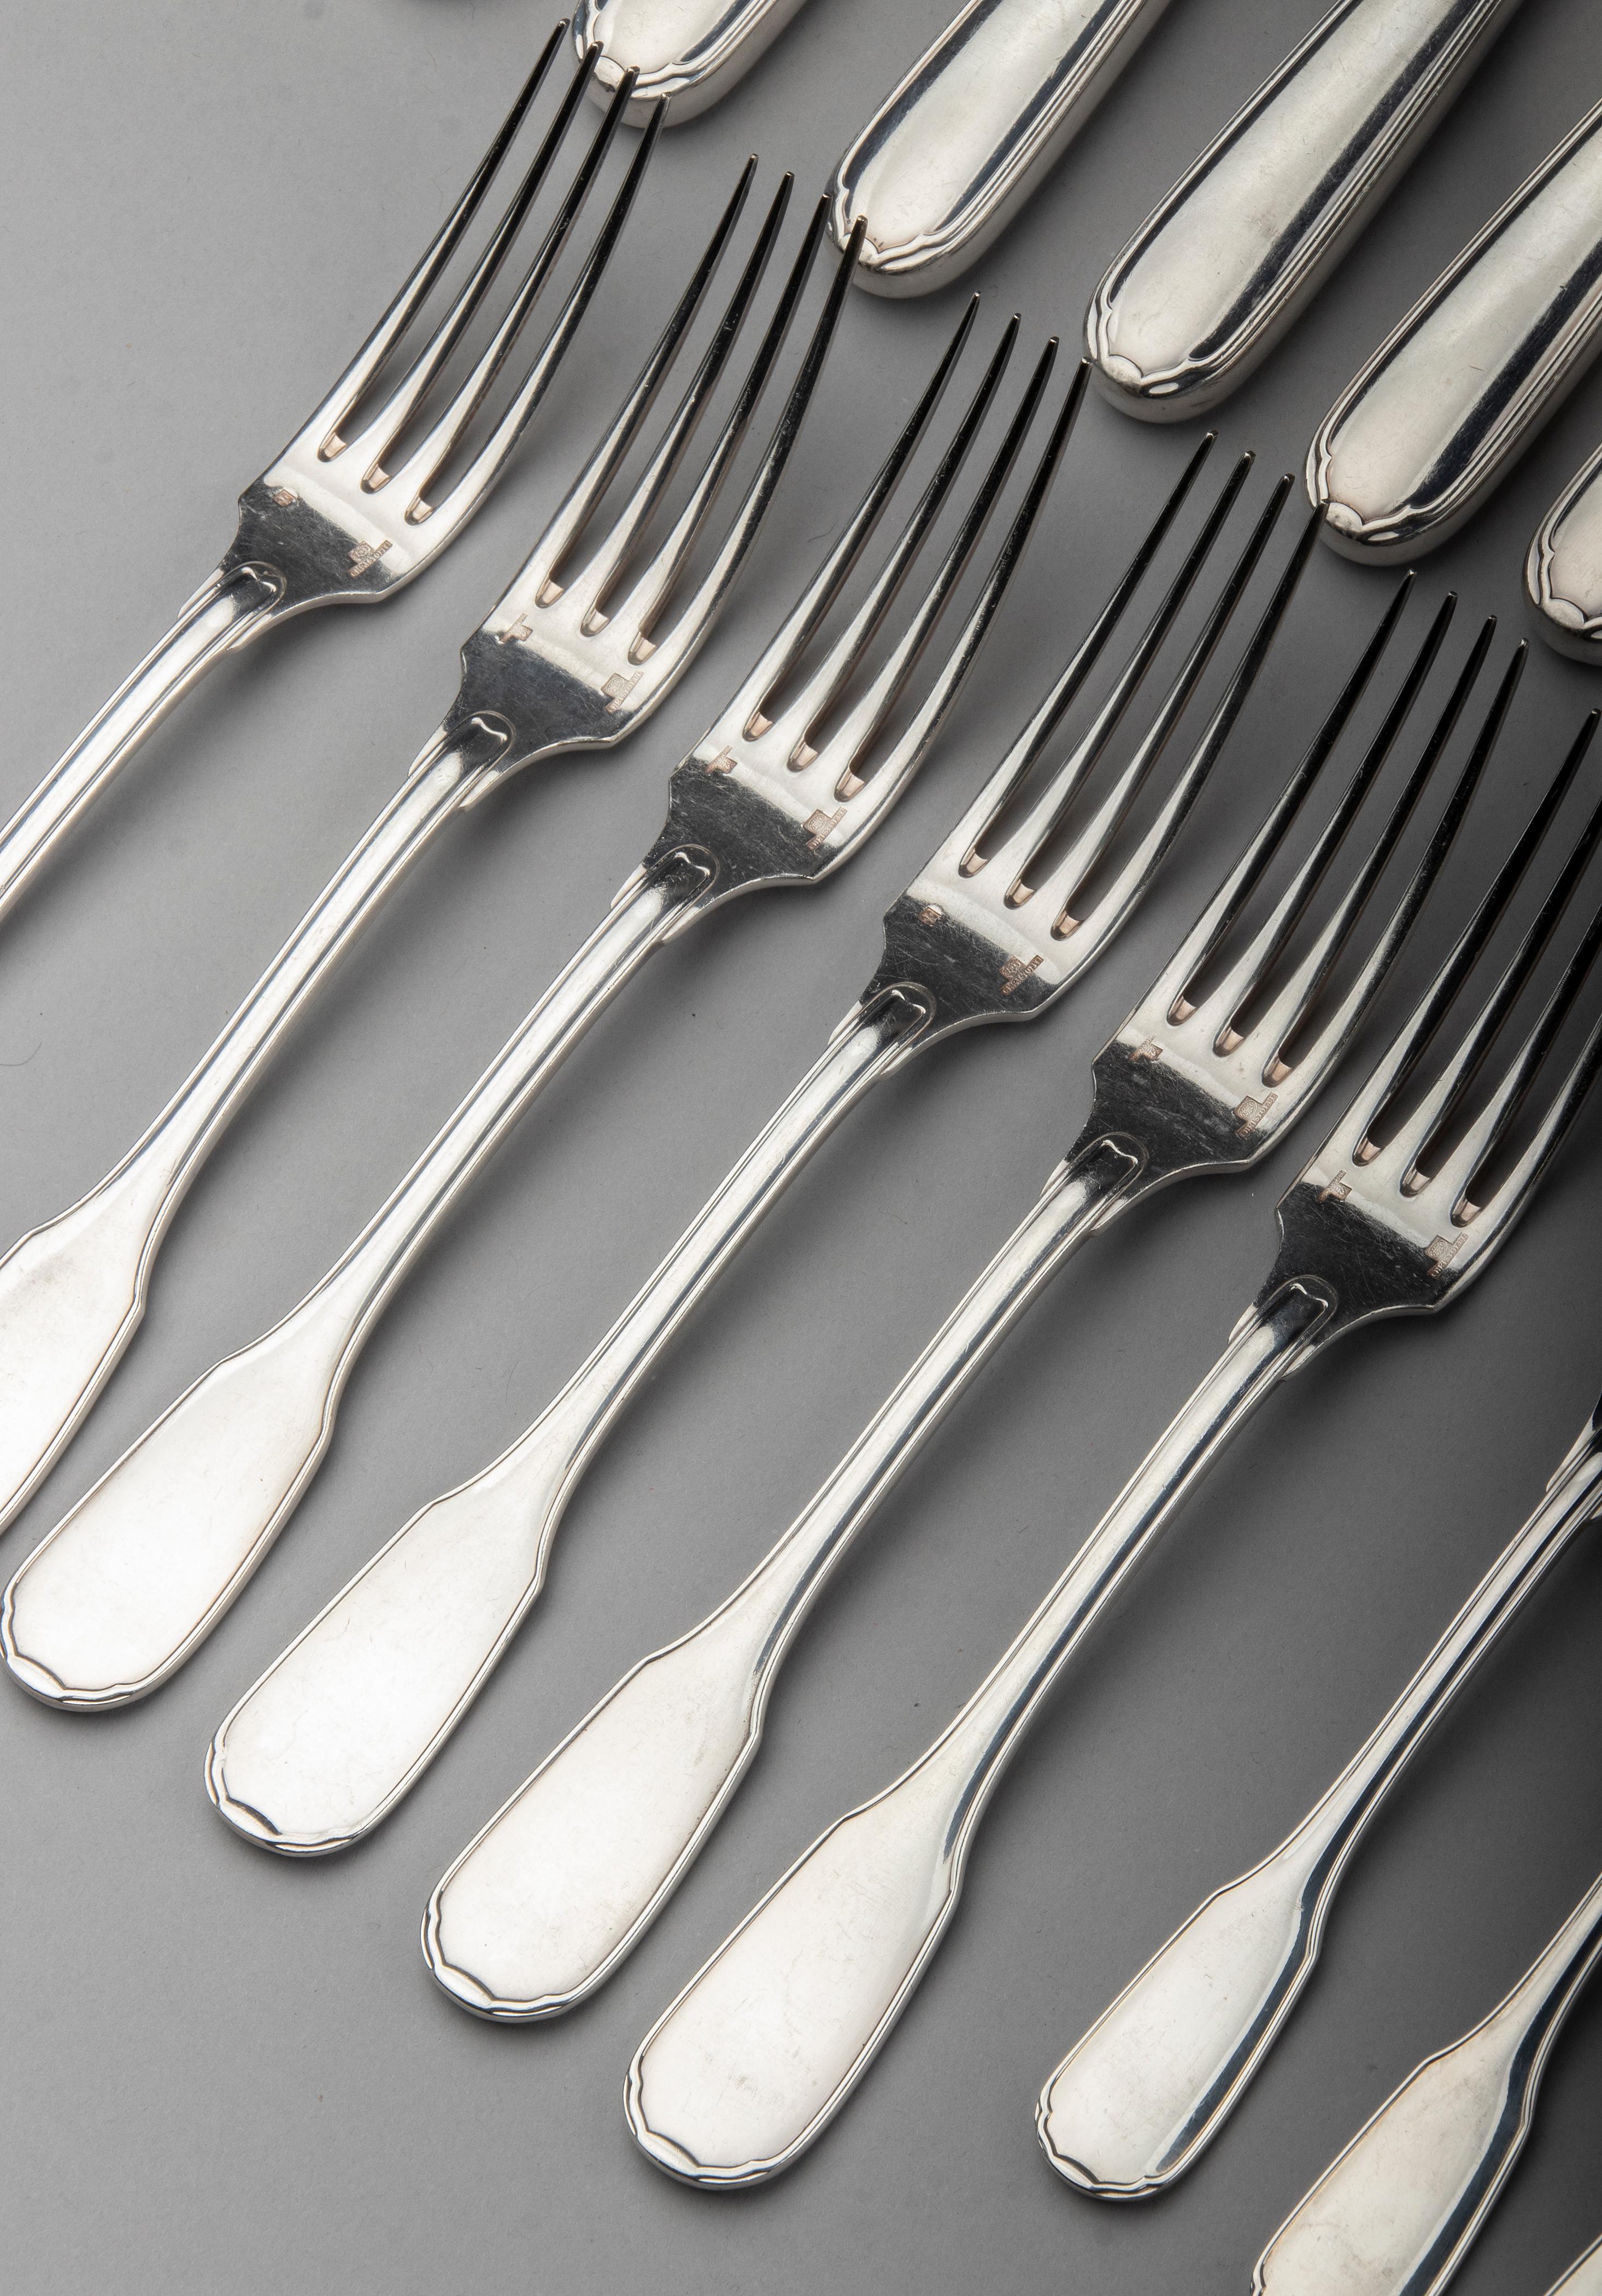 48-Piece Set of Silver Plated Flatware by Christofle Model Versailles 8